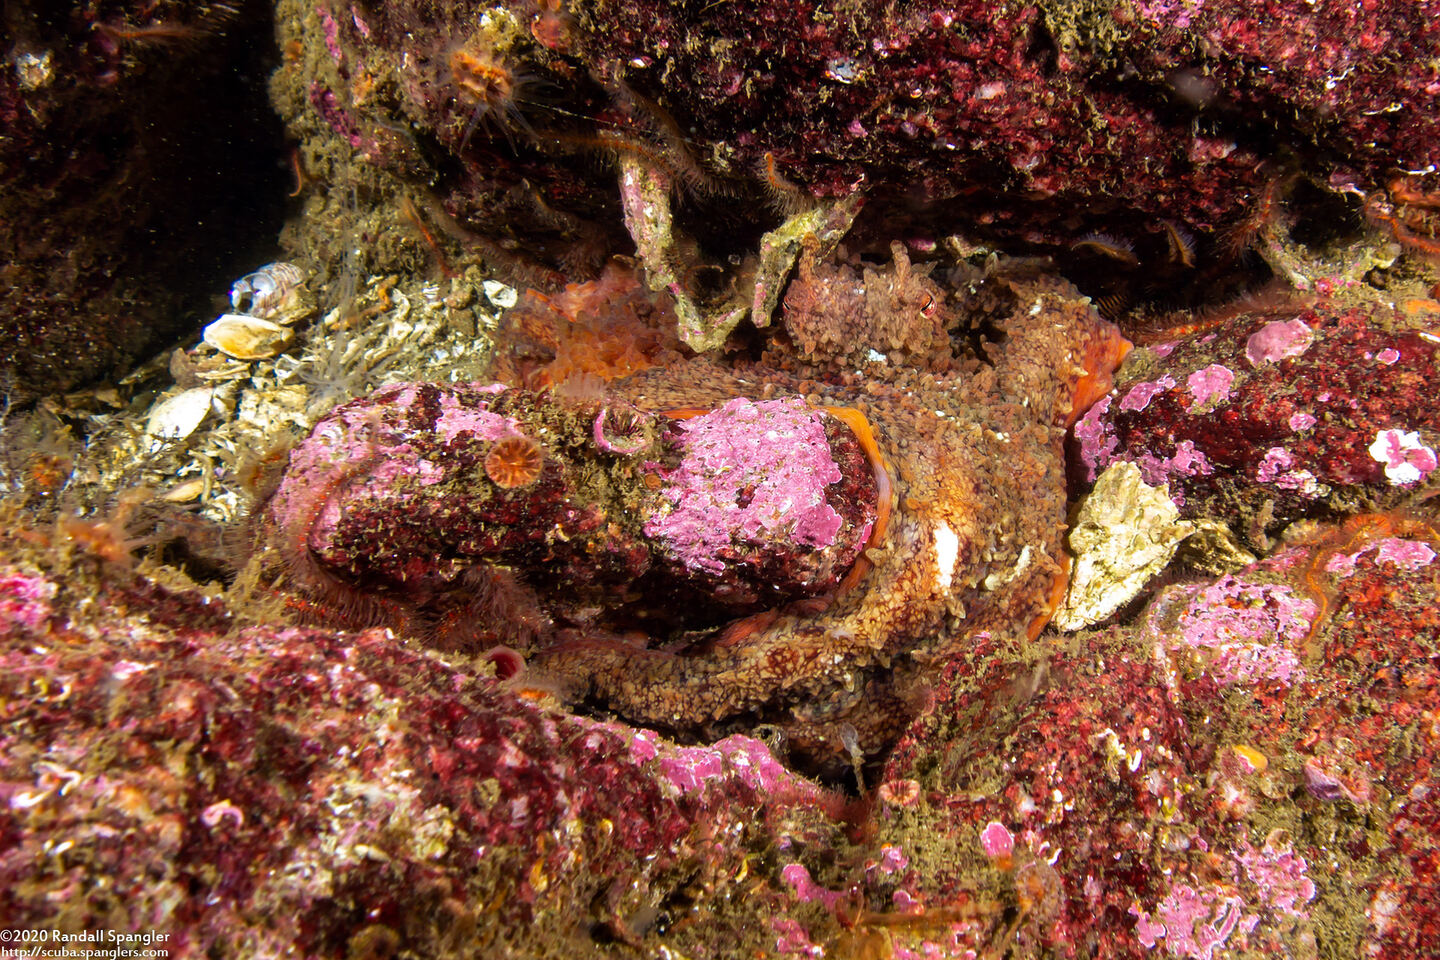 Octopus rubescens (Red Octopus); Can you find the octopus?